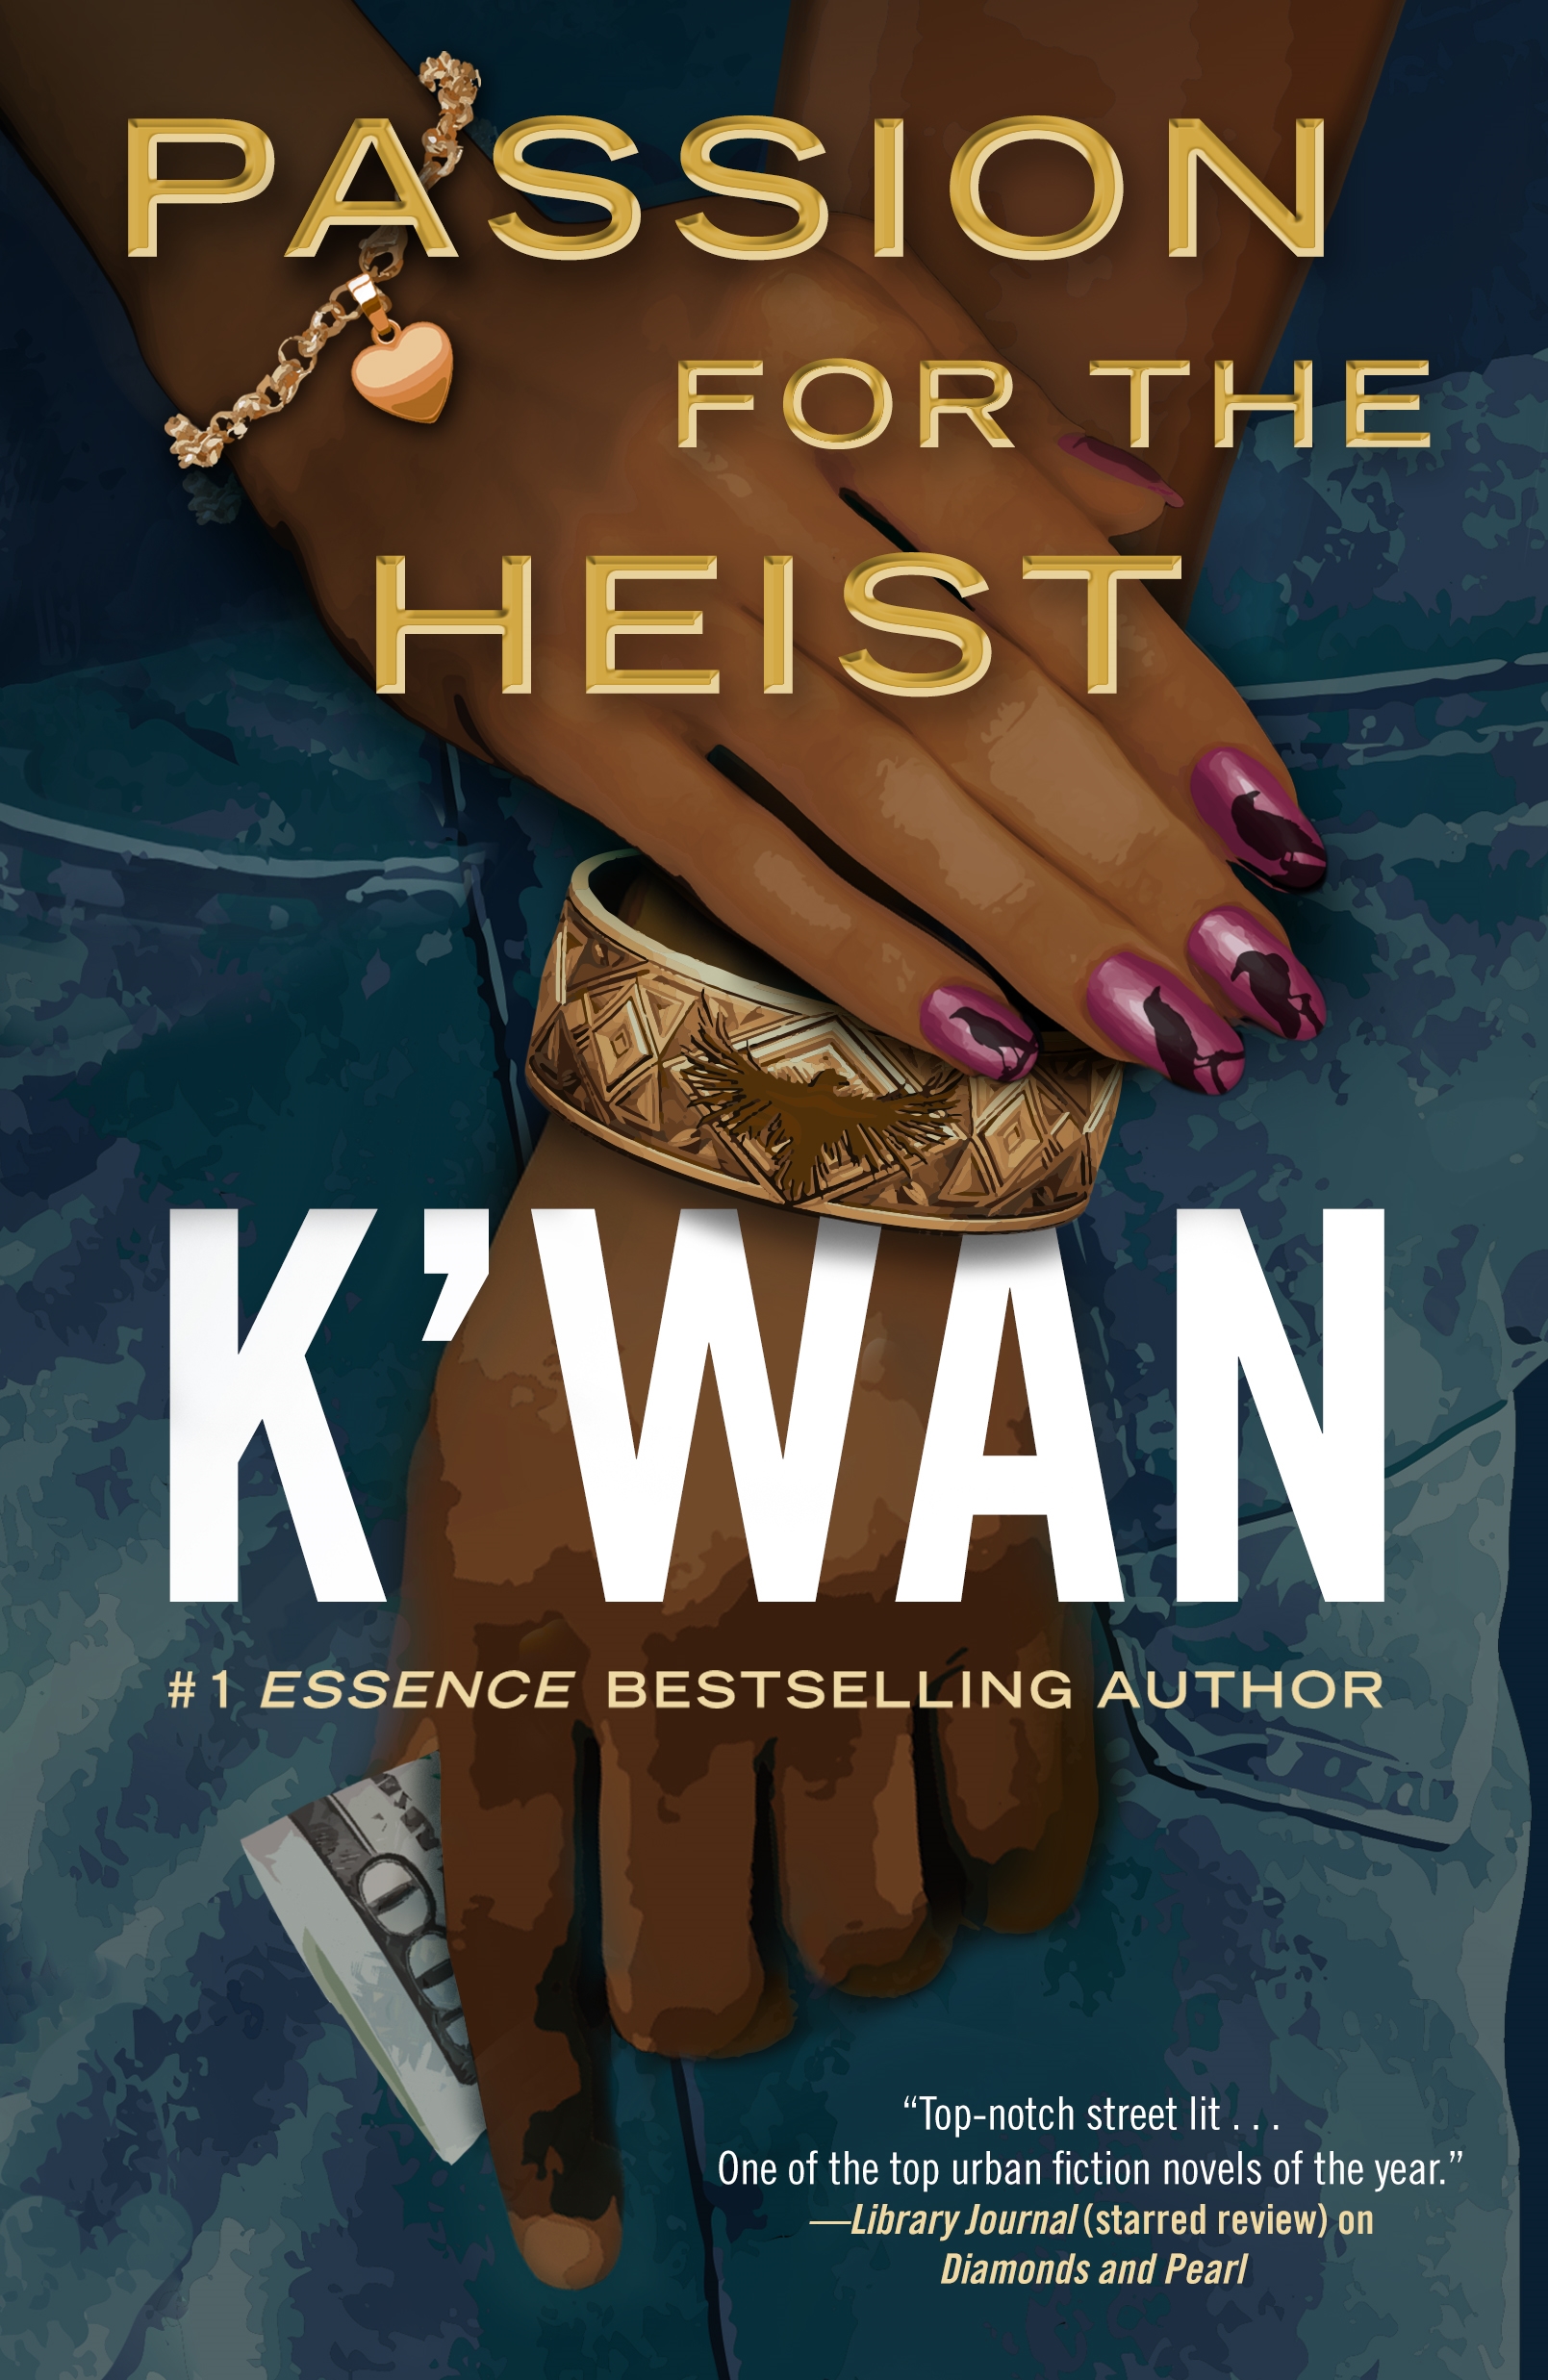 Passion for the Heist by K'wan